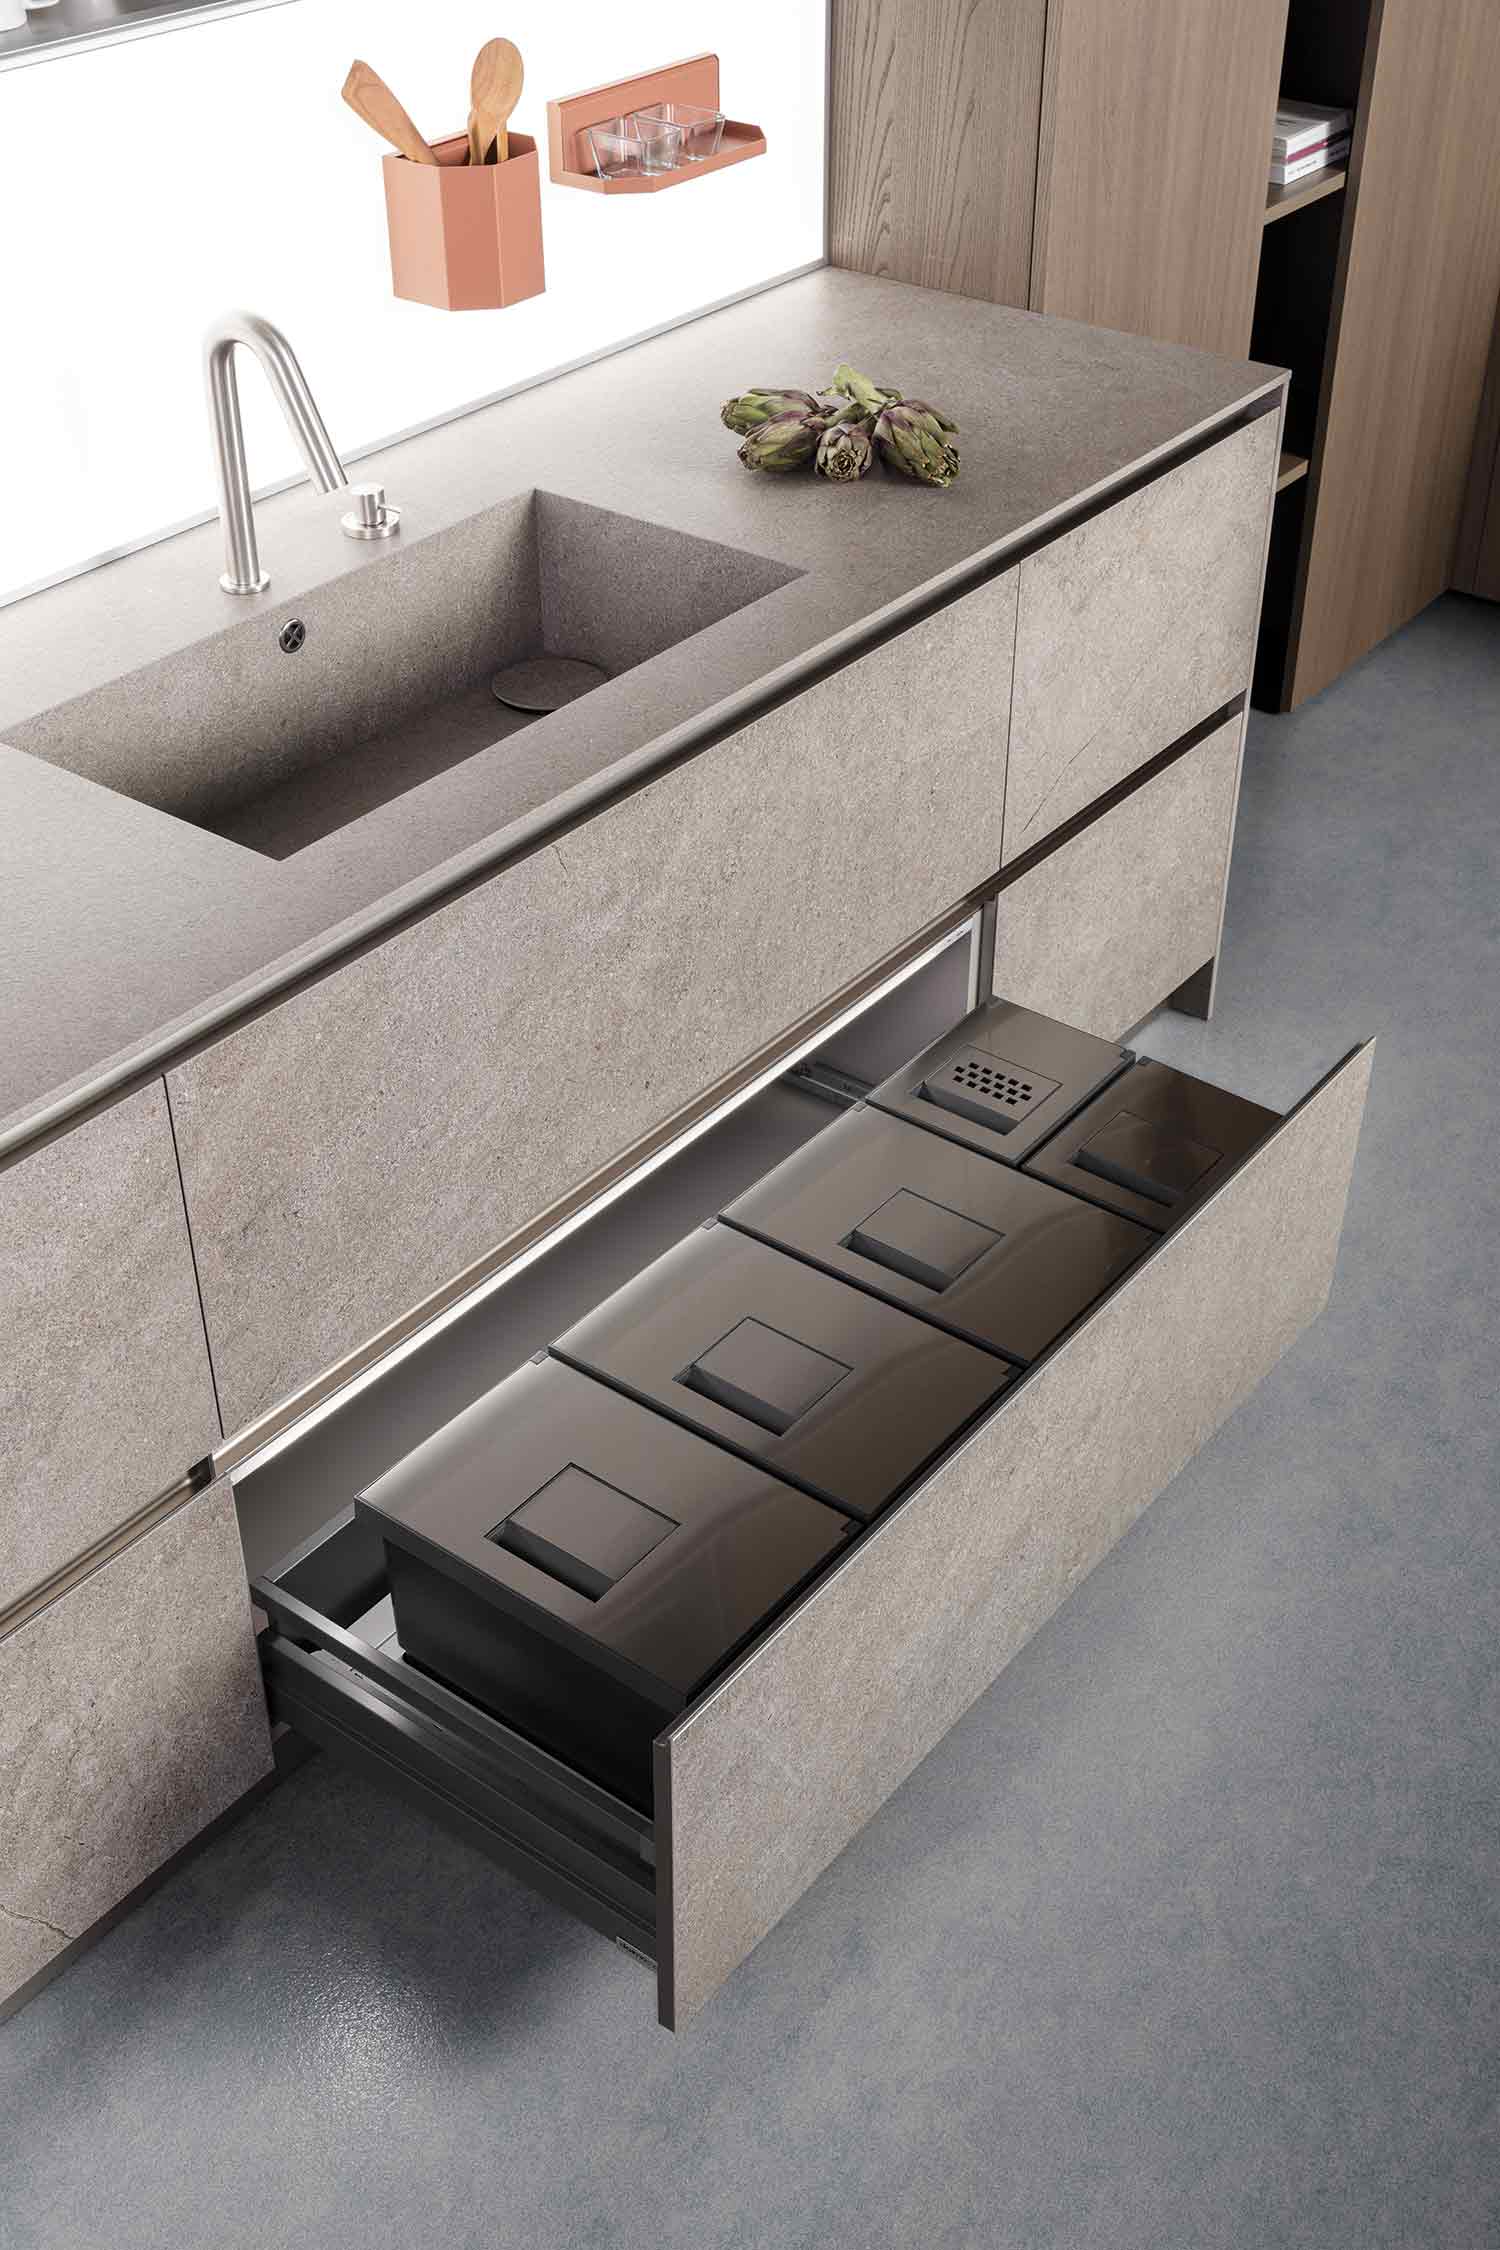 Multi-function refuse and recycling bins equipped within the deep drawer.